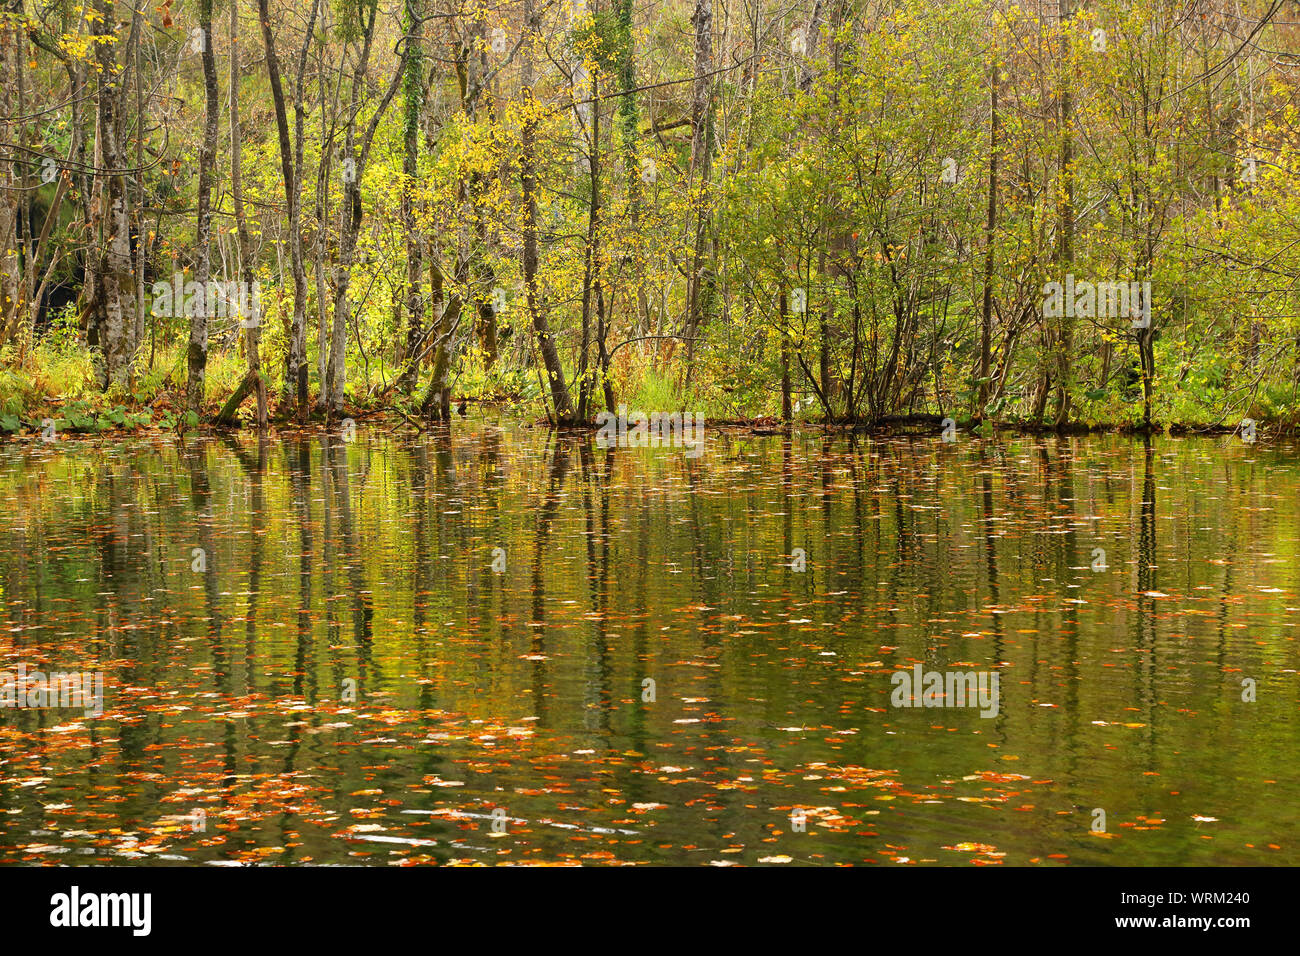 Reflection Of Trees In Lake At Plitvice Lakes National Park Stock Photo